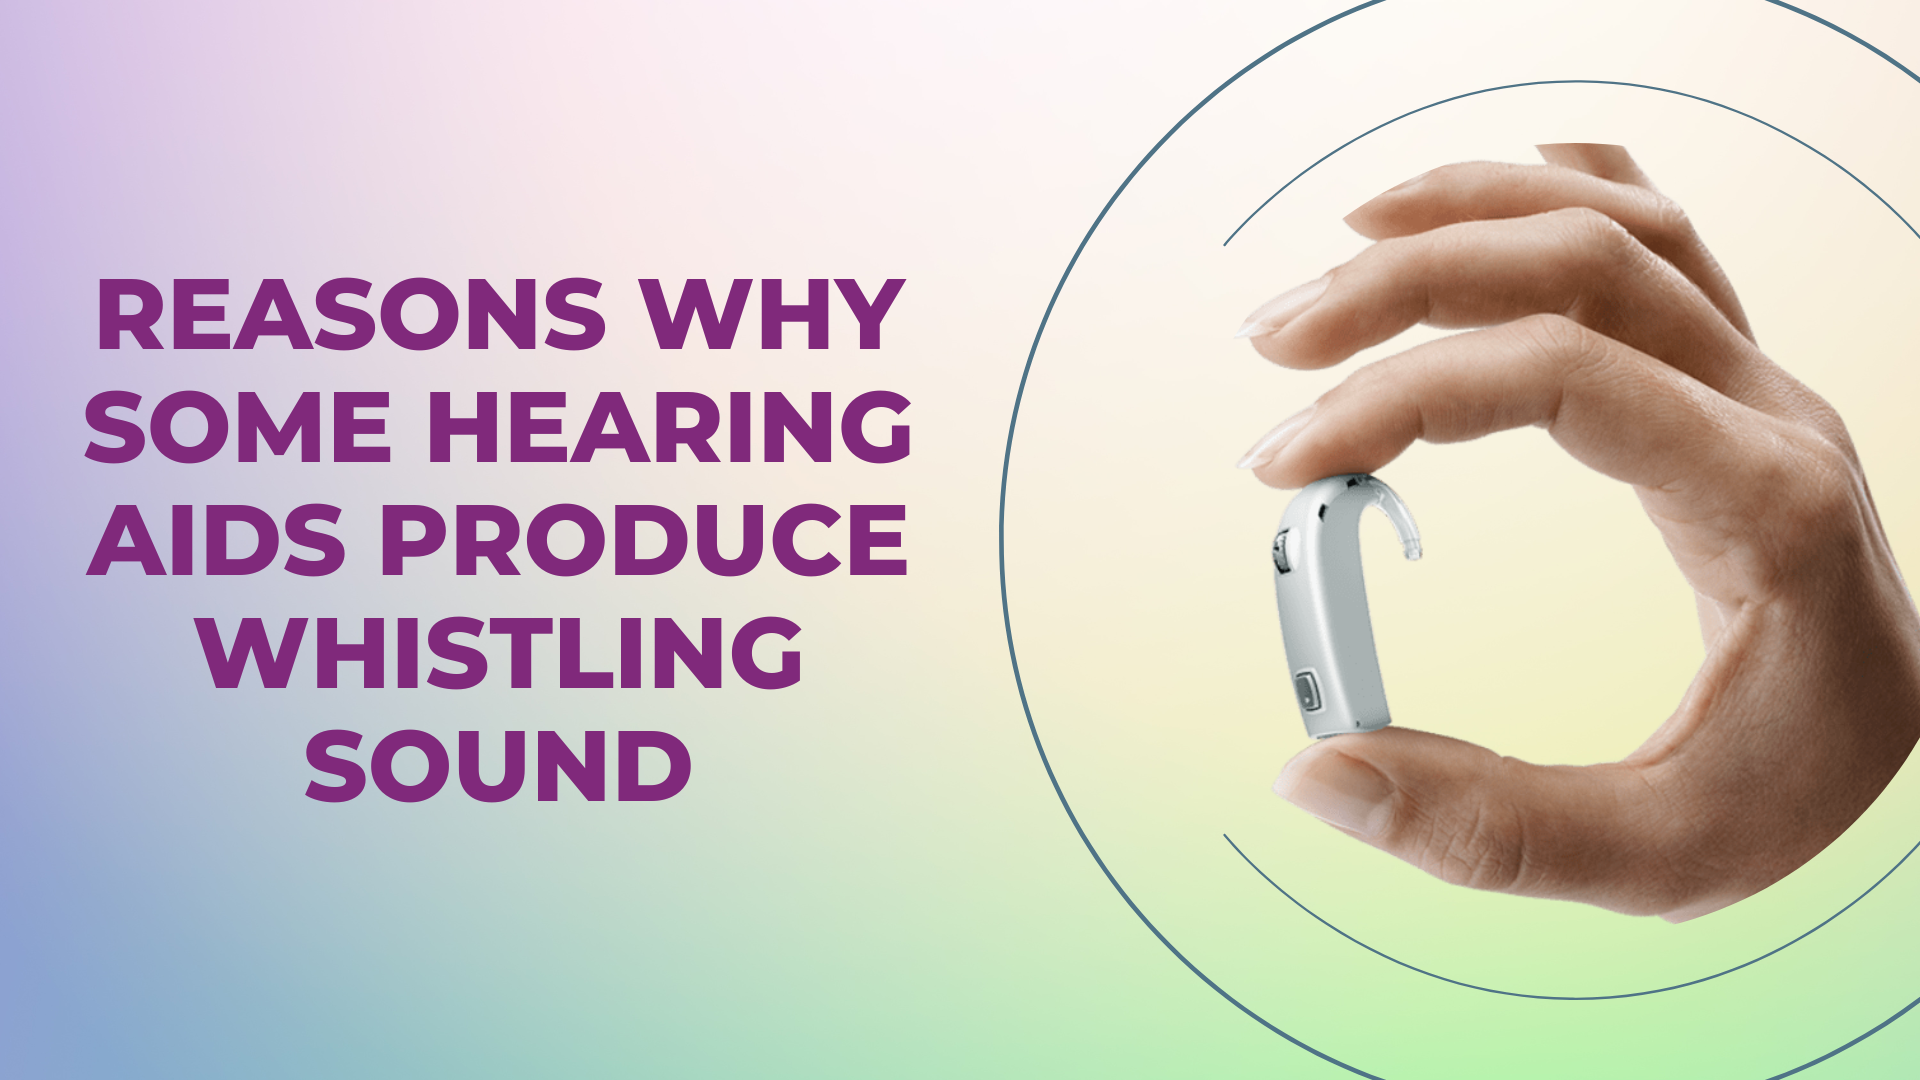 Reasons Why Some Hearing Aids Produce Whistling Sound